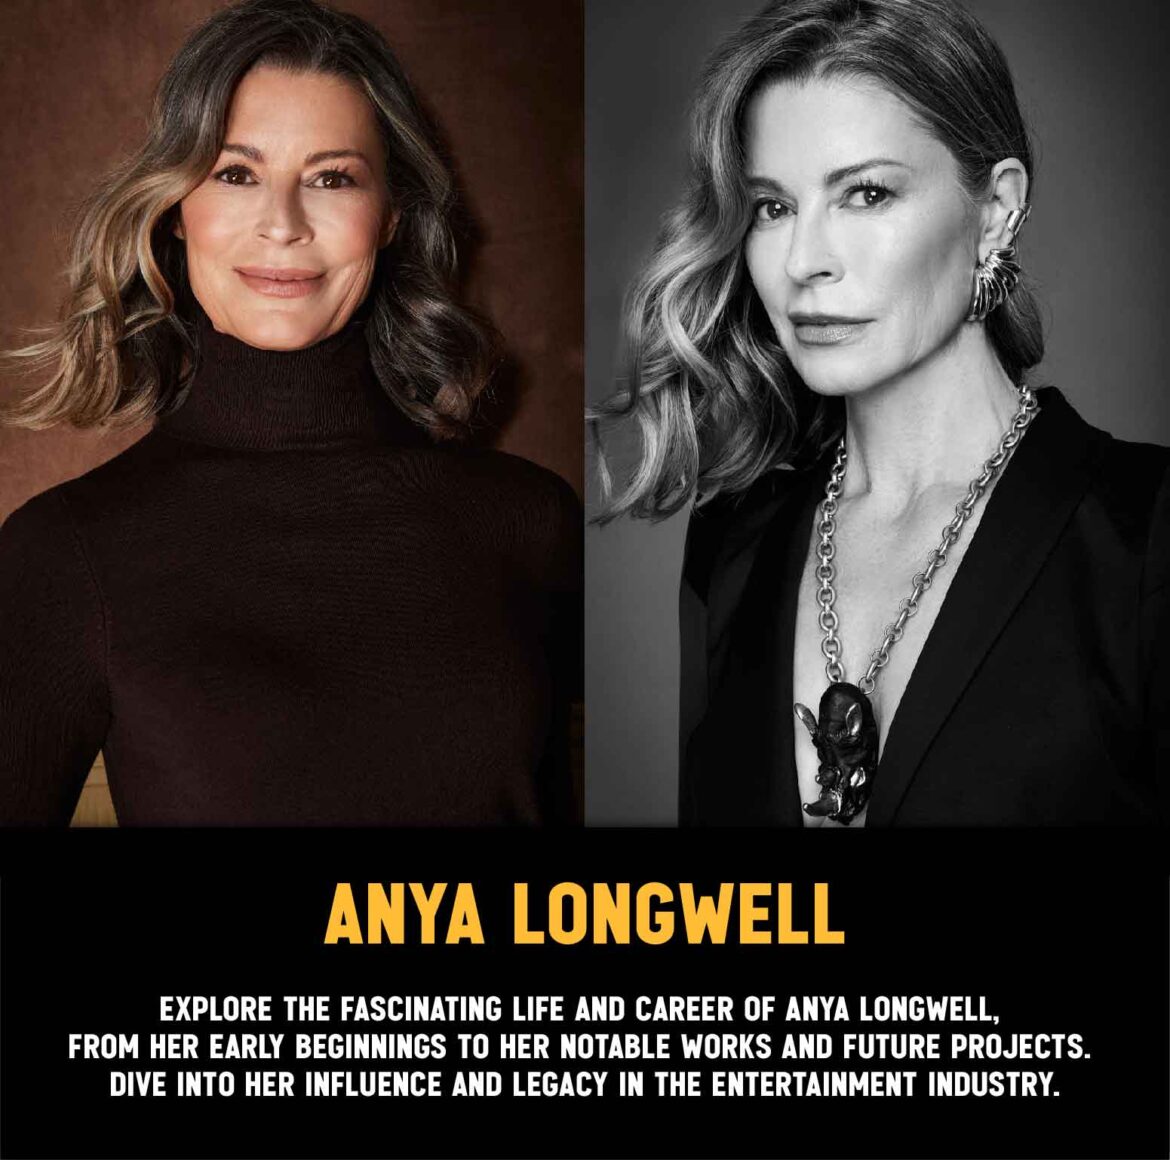 Anya Longwell: A Comprehensive Look at Her Life and Career